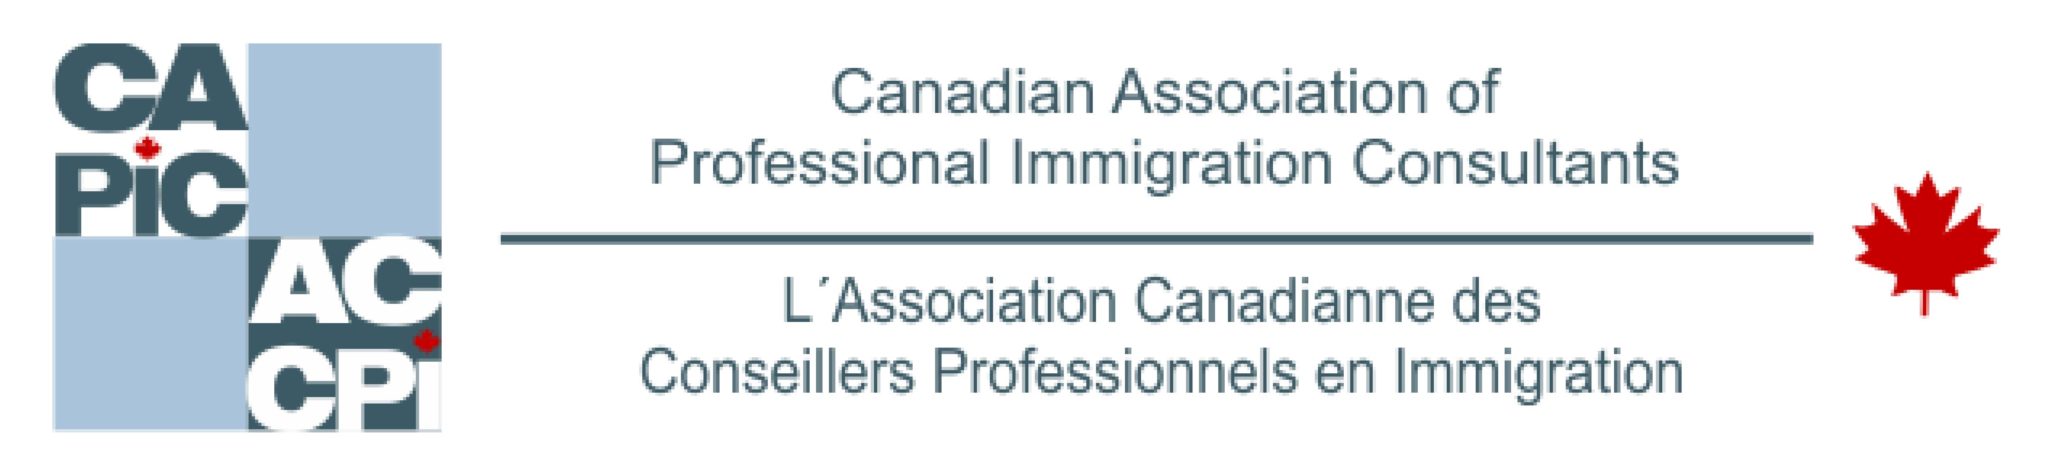 Canadian Association of Professional Immigration Consultants